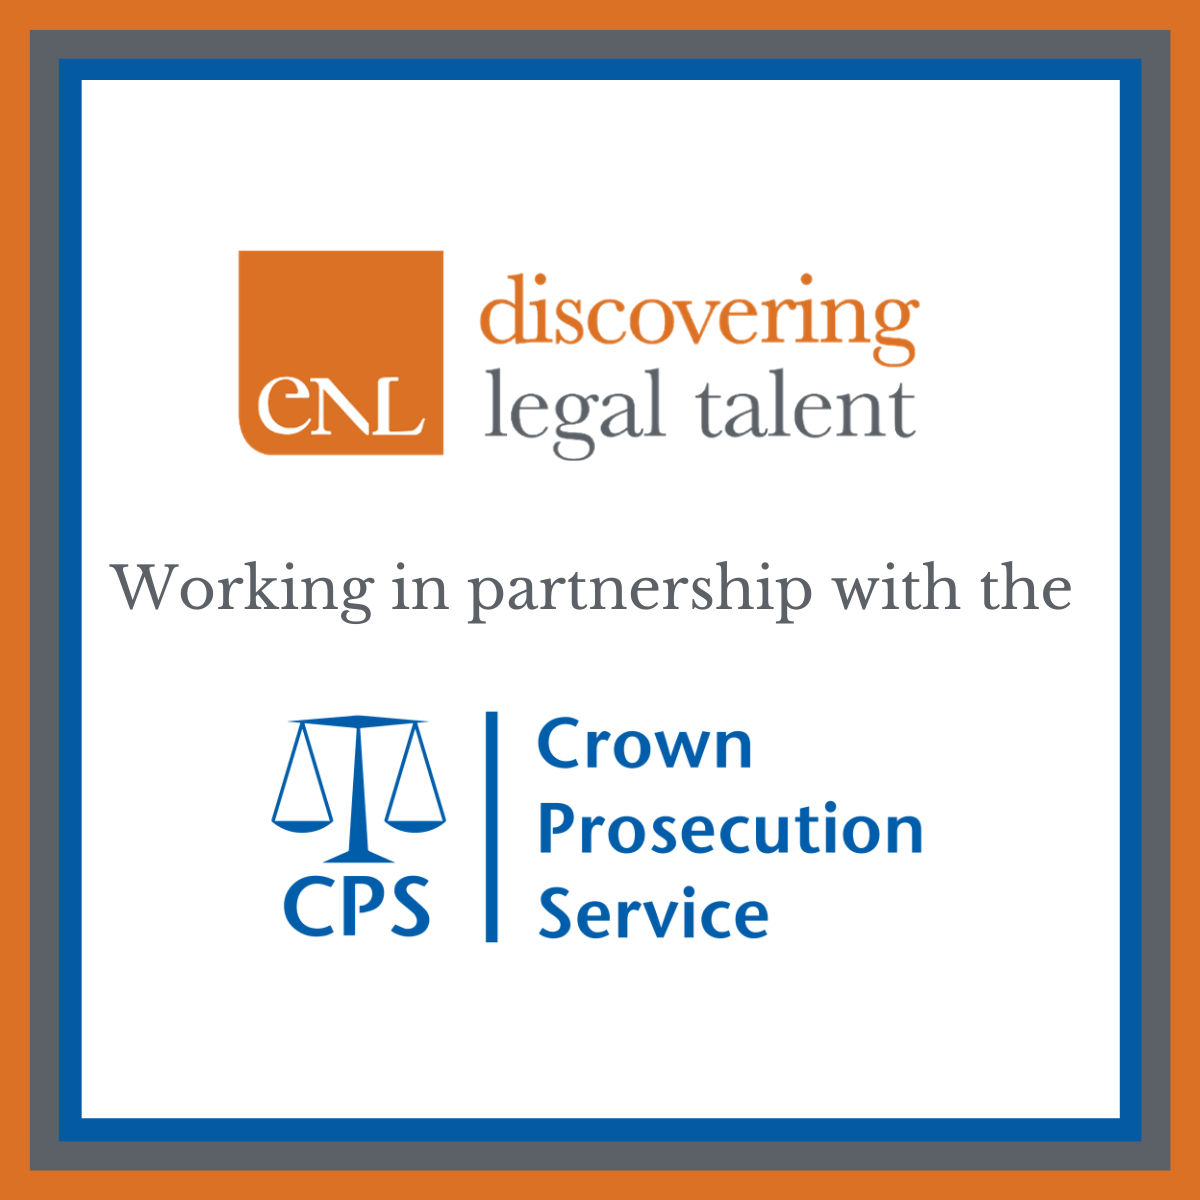 Are you looking for a new legal job?